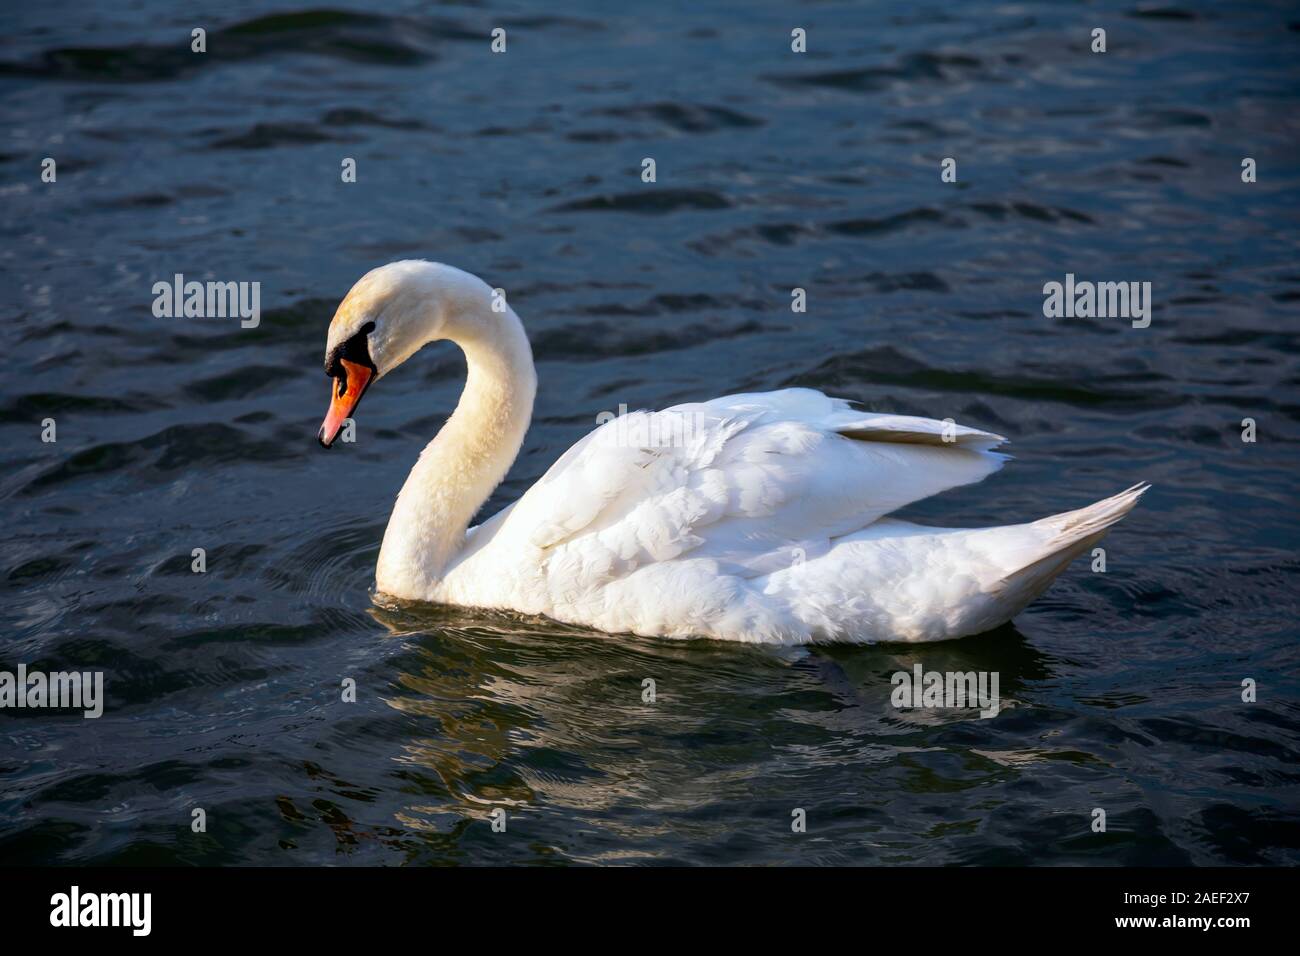 Close-up view of a lone white swan swimming in the Danube river. Image Stock Photo